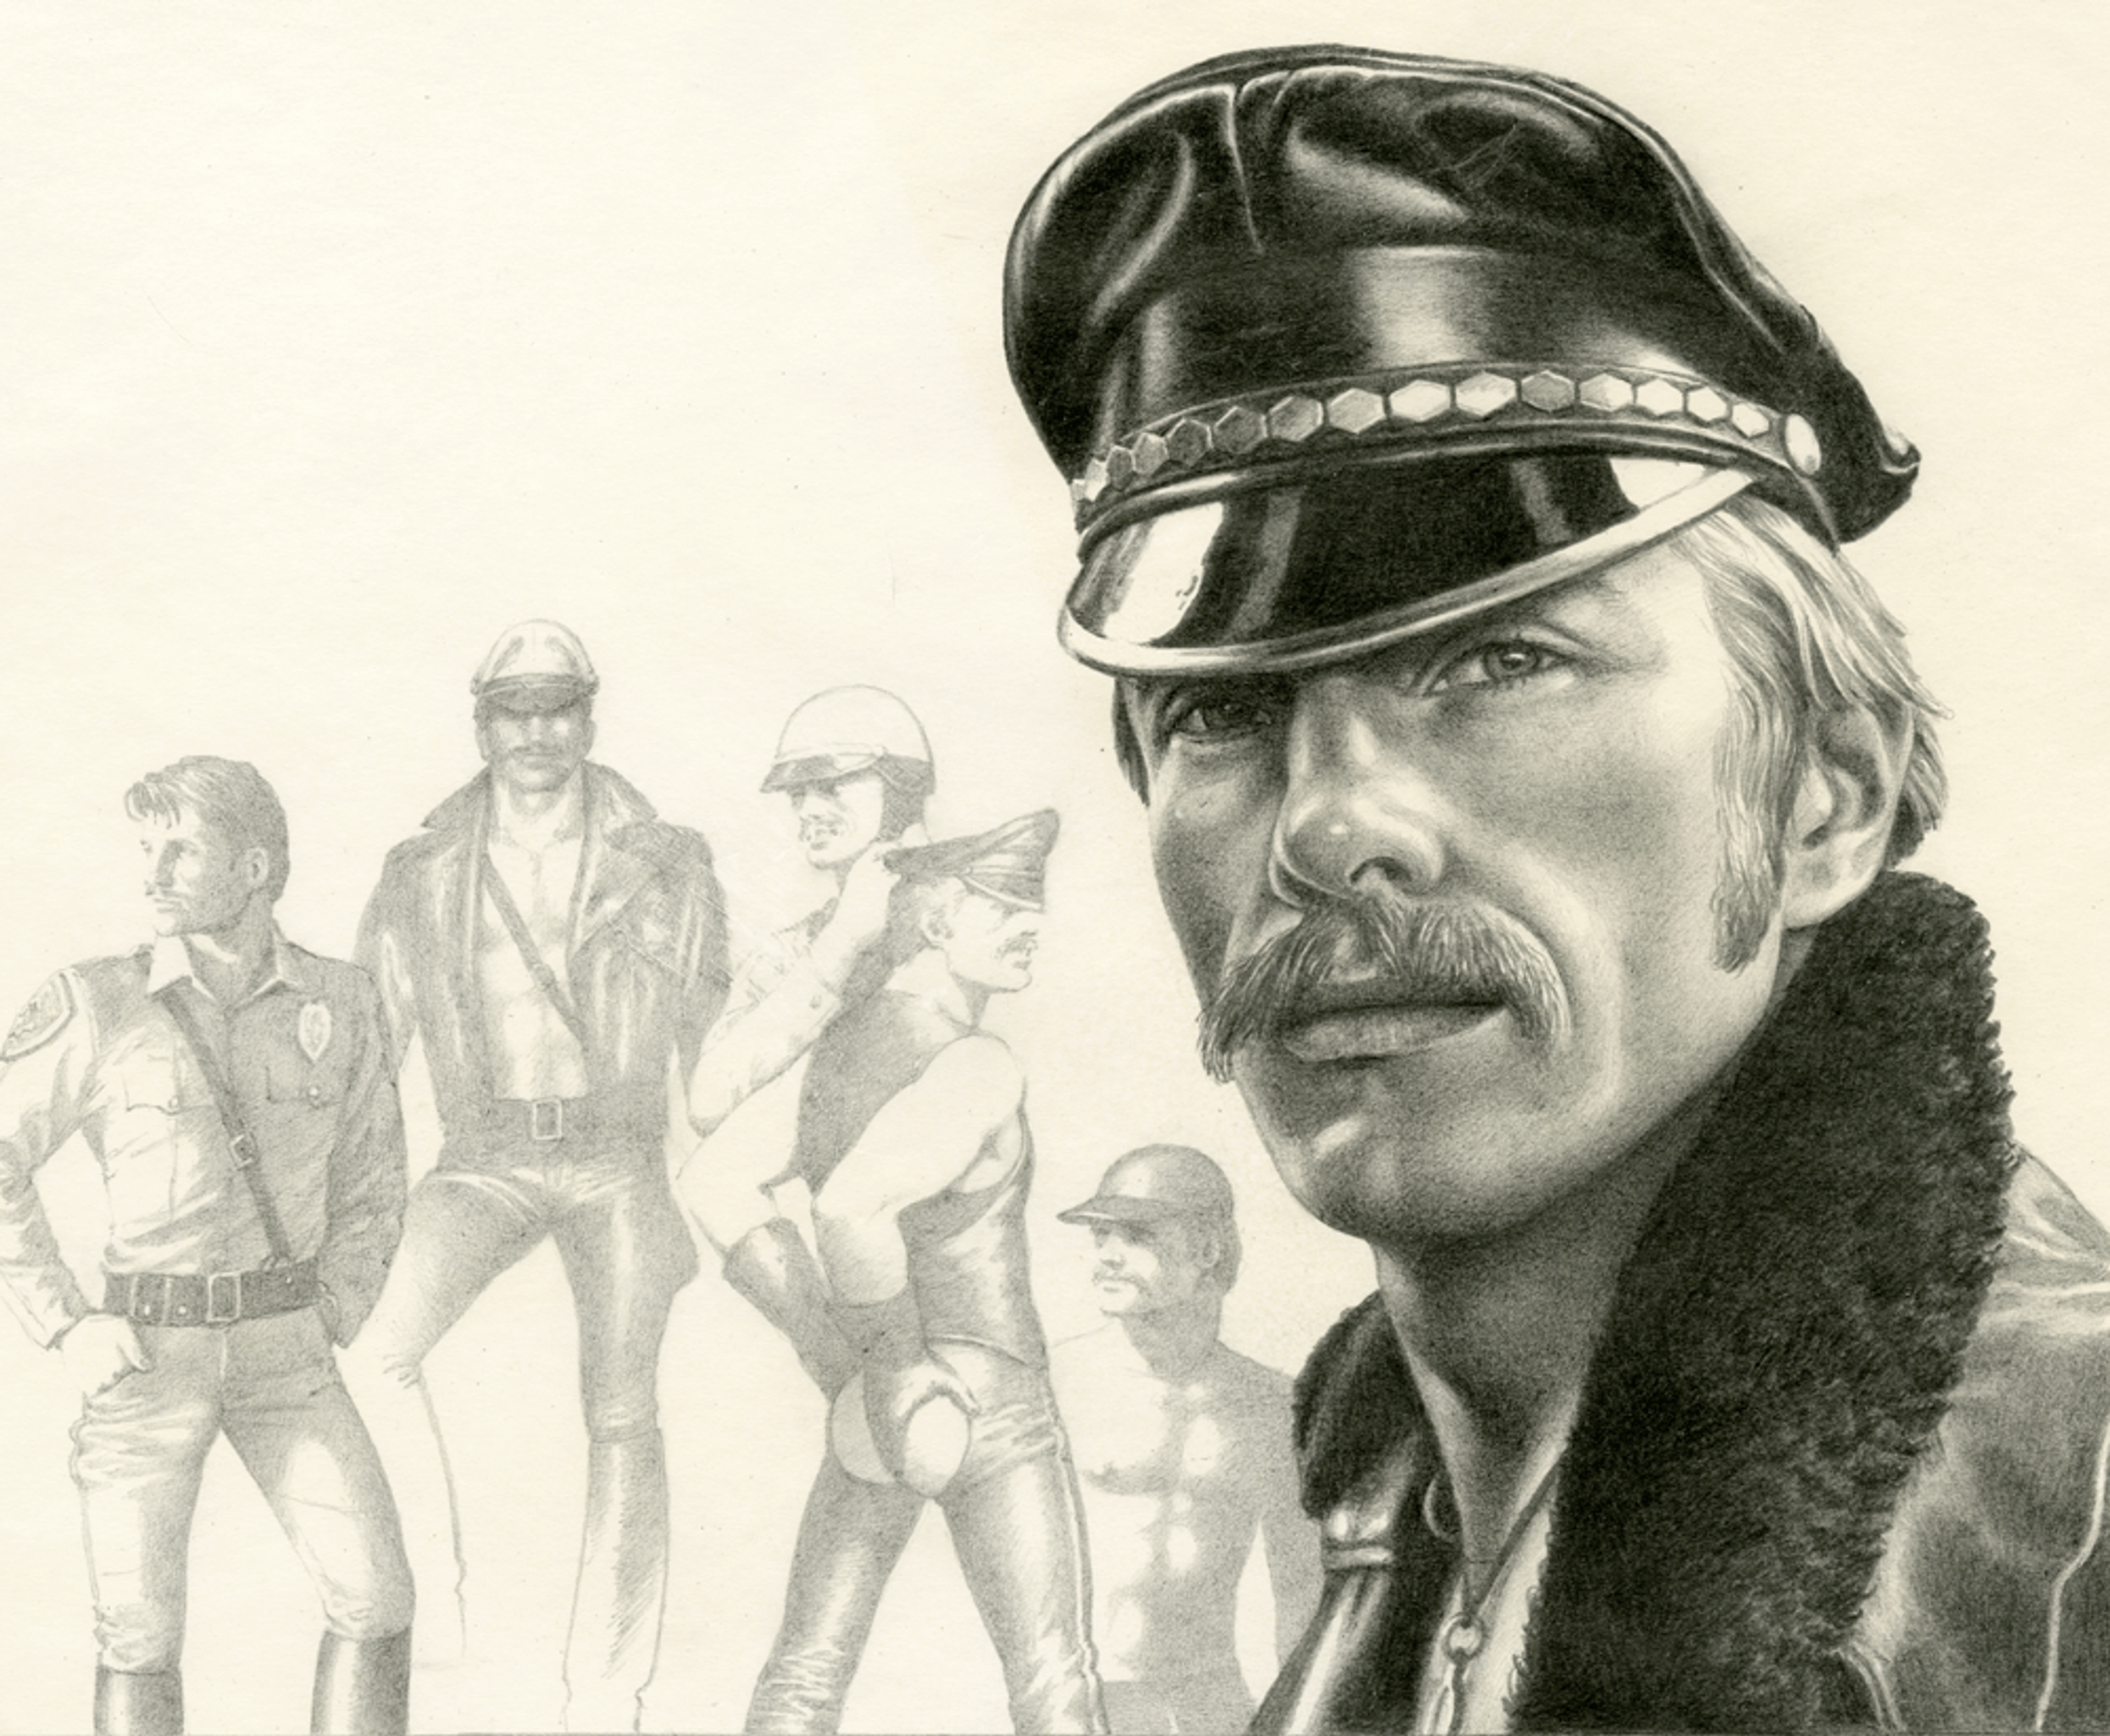 Pencil sketch of a portrait on a man with a moustache wearing a leather peaked cap. The background includes sketches of a number of well-built men posing.